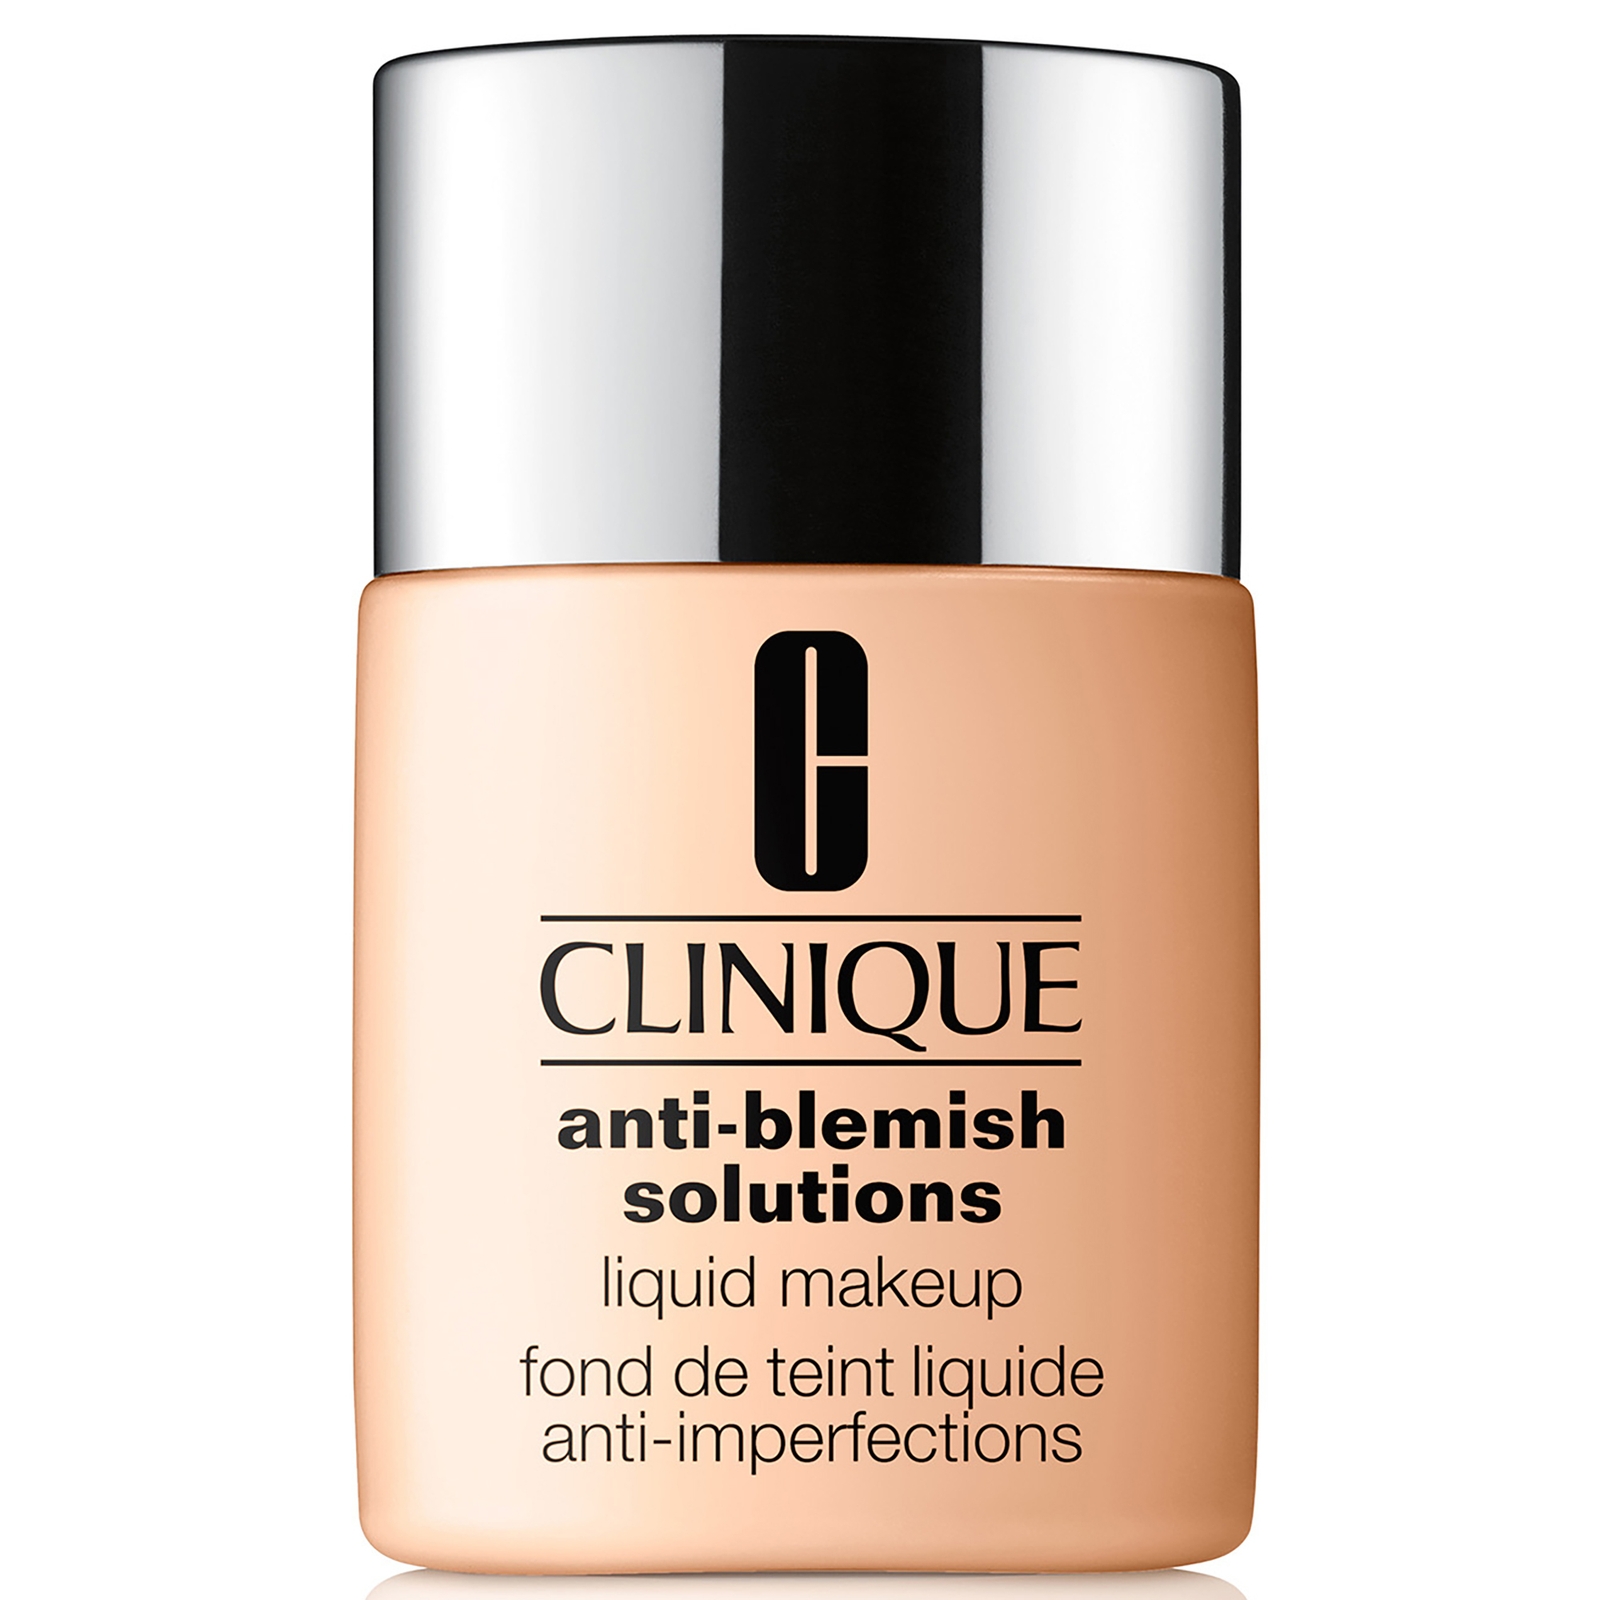 Image of Clinique Anti-Blemish Solutions Liquid Makeup with Salicylic Acid 30ml (Various Shades) - WN 01 Flax